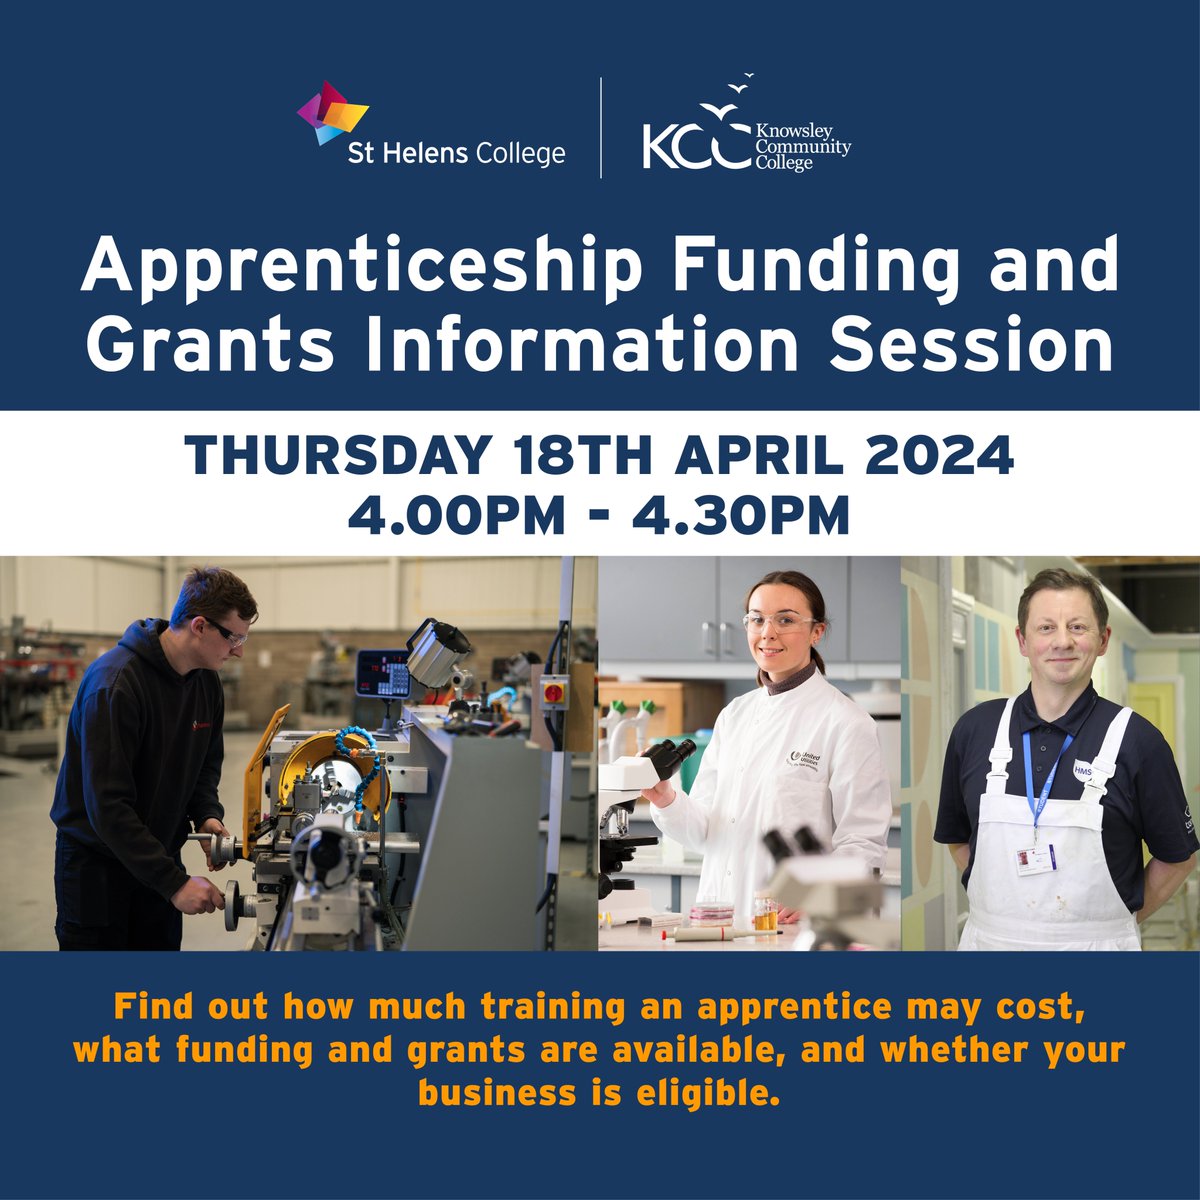 Employers - Join our online Apprenticeship Funding and Grants Information Session on Thursday 18th April, 4.00pm - 4.30pm 📅 We'll be joined by @KnowsleyCouncil Apprenticeship Team, @CITB_UK & @LpoolCityRegion! ▶️Register your place at: bit.ly/4cBjGUx #apprenticeships